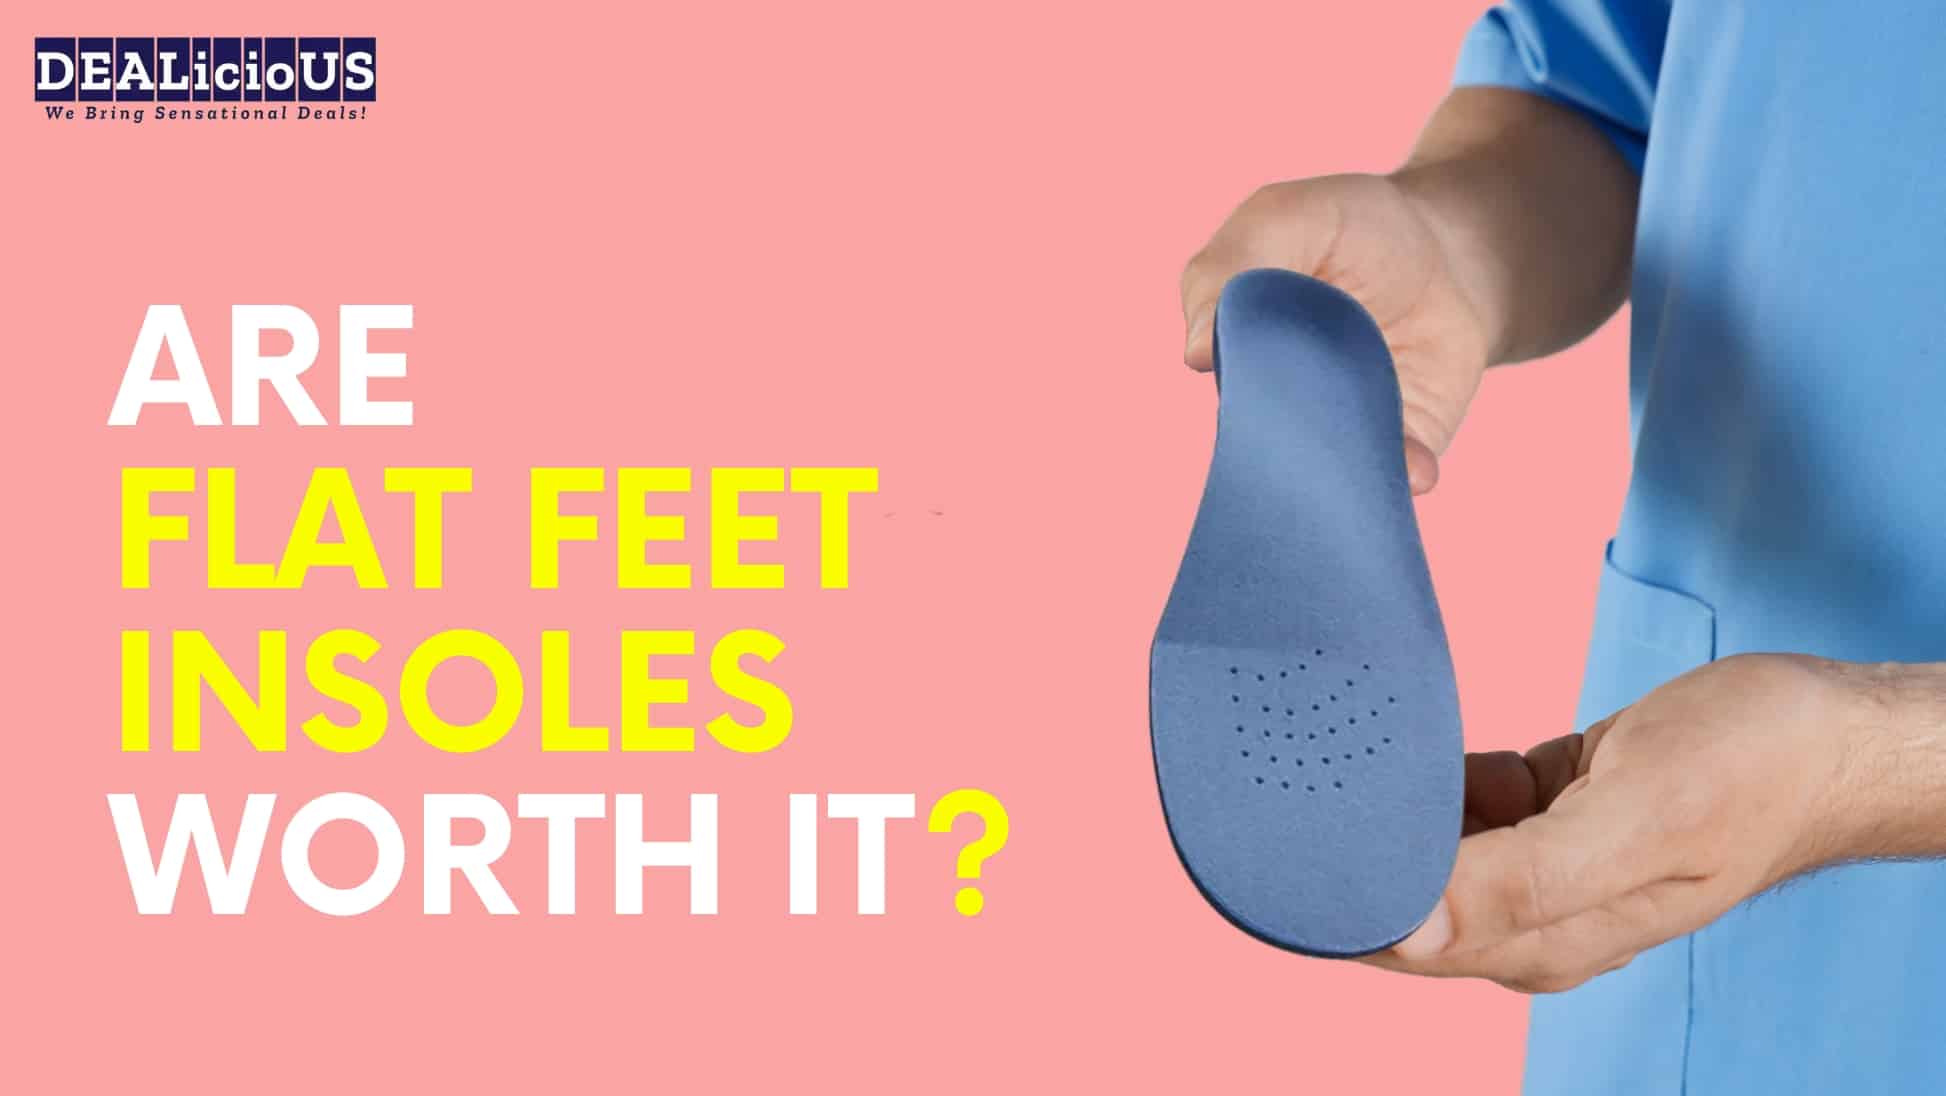 Are flat feet insoles worth it?